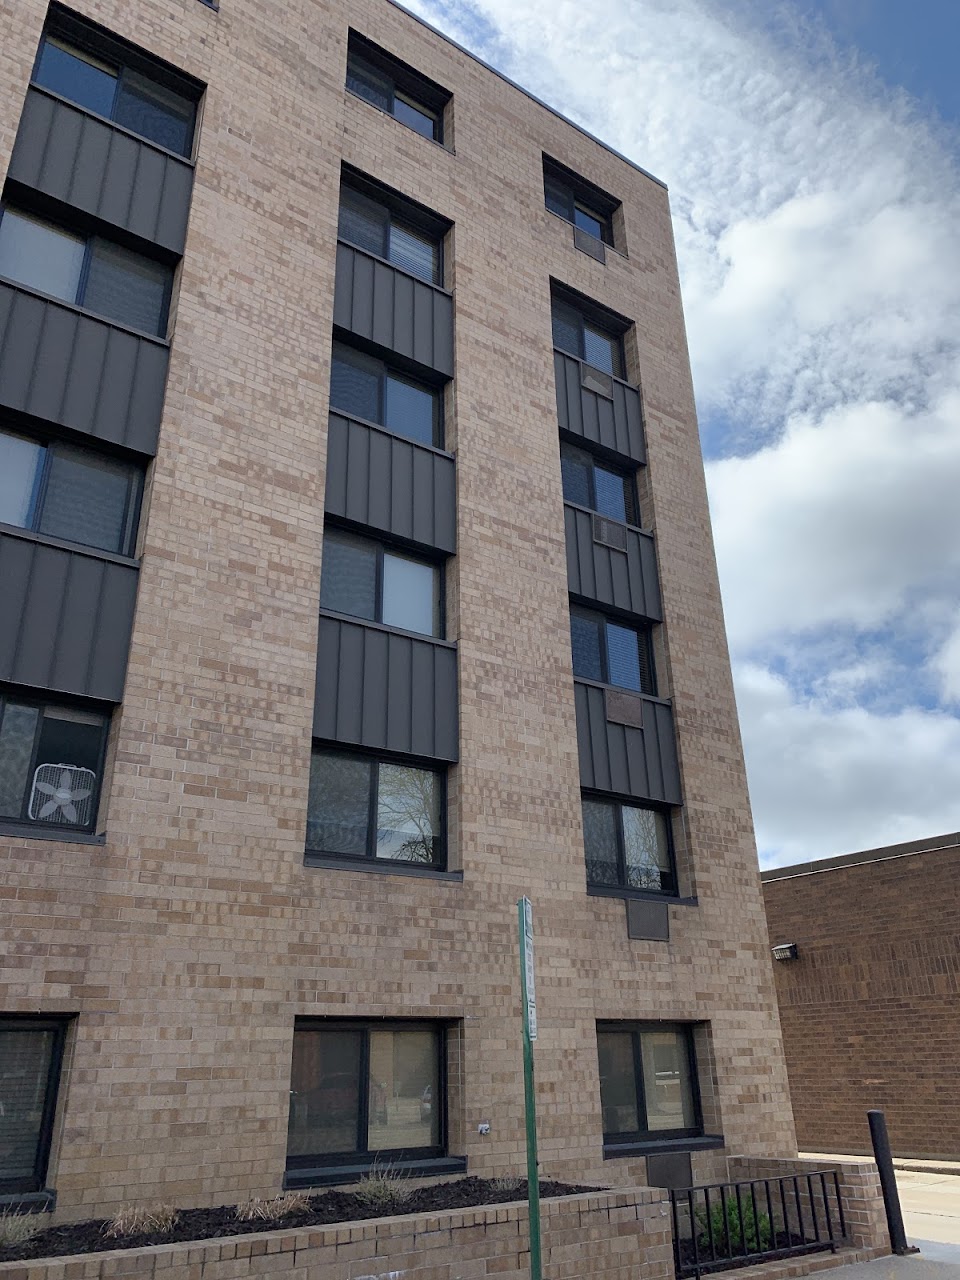 Photo of WINHAVEN APARTMENTS. Affordable housing located at 104 MAIN ST WINONA, MN 55987